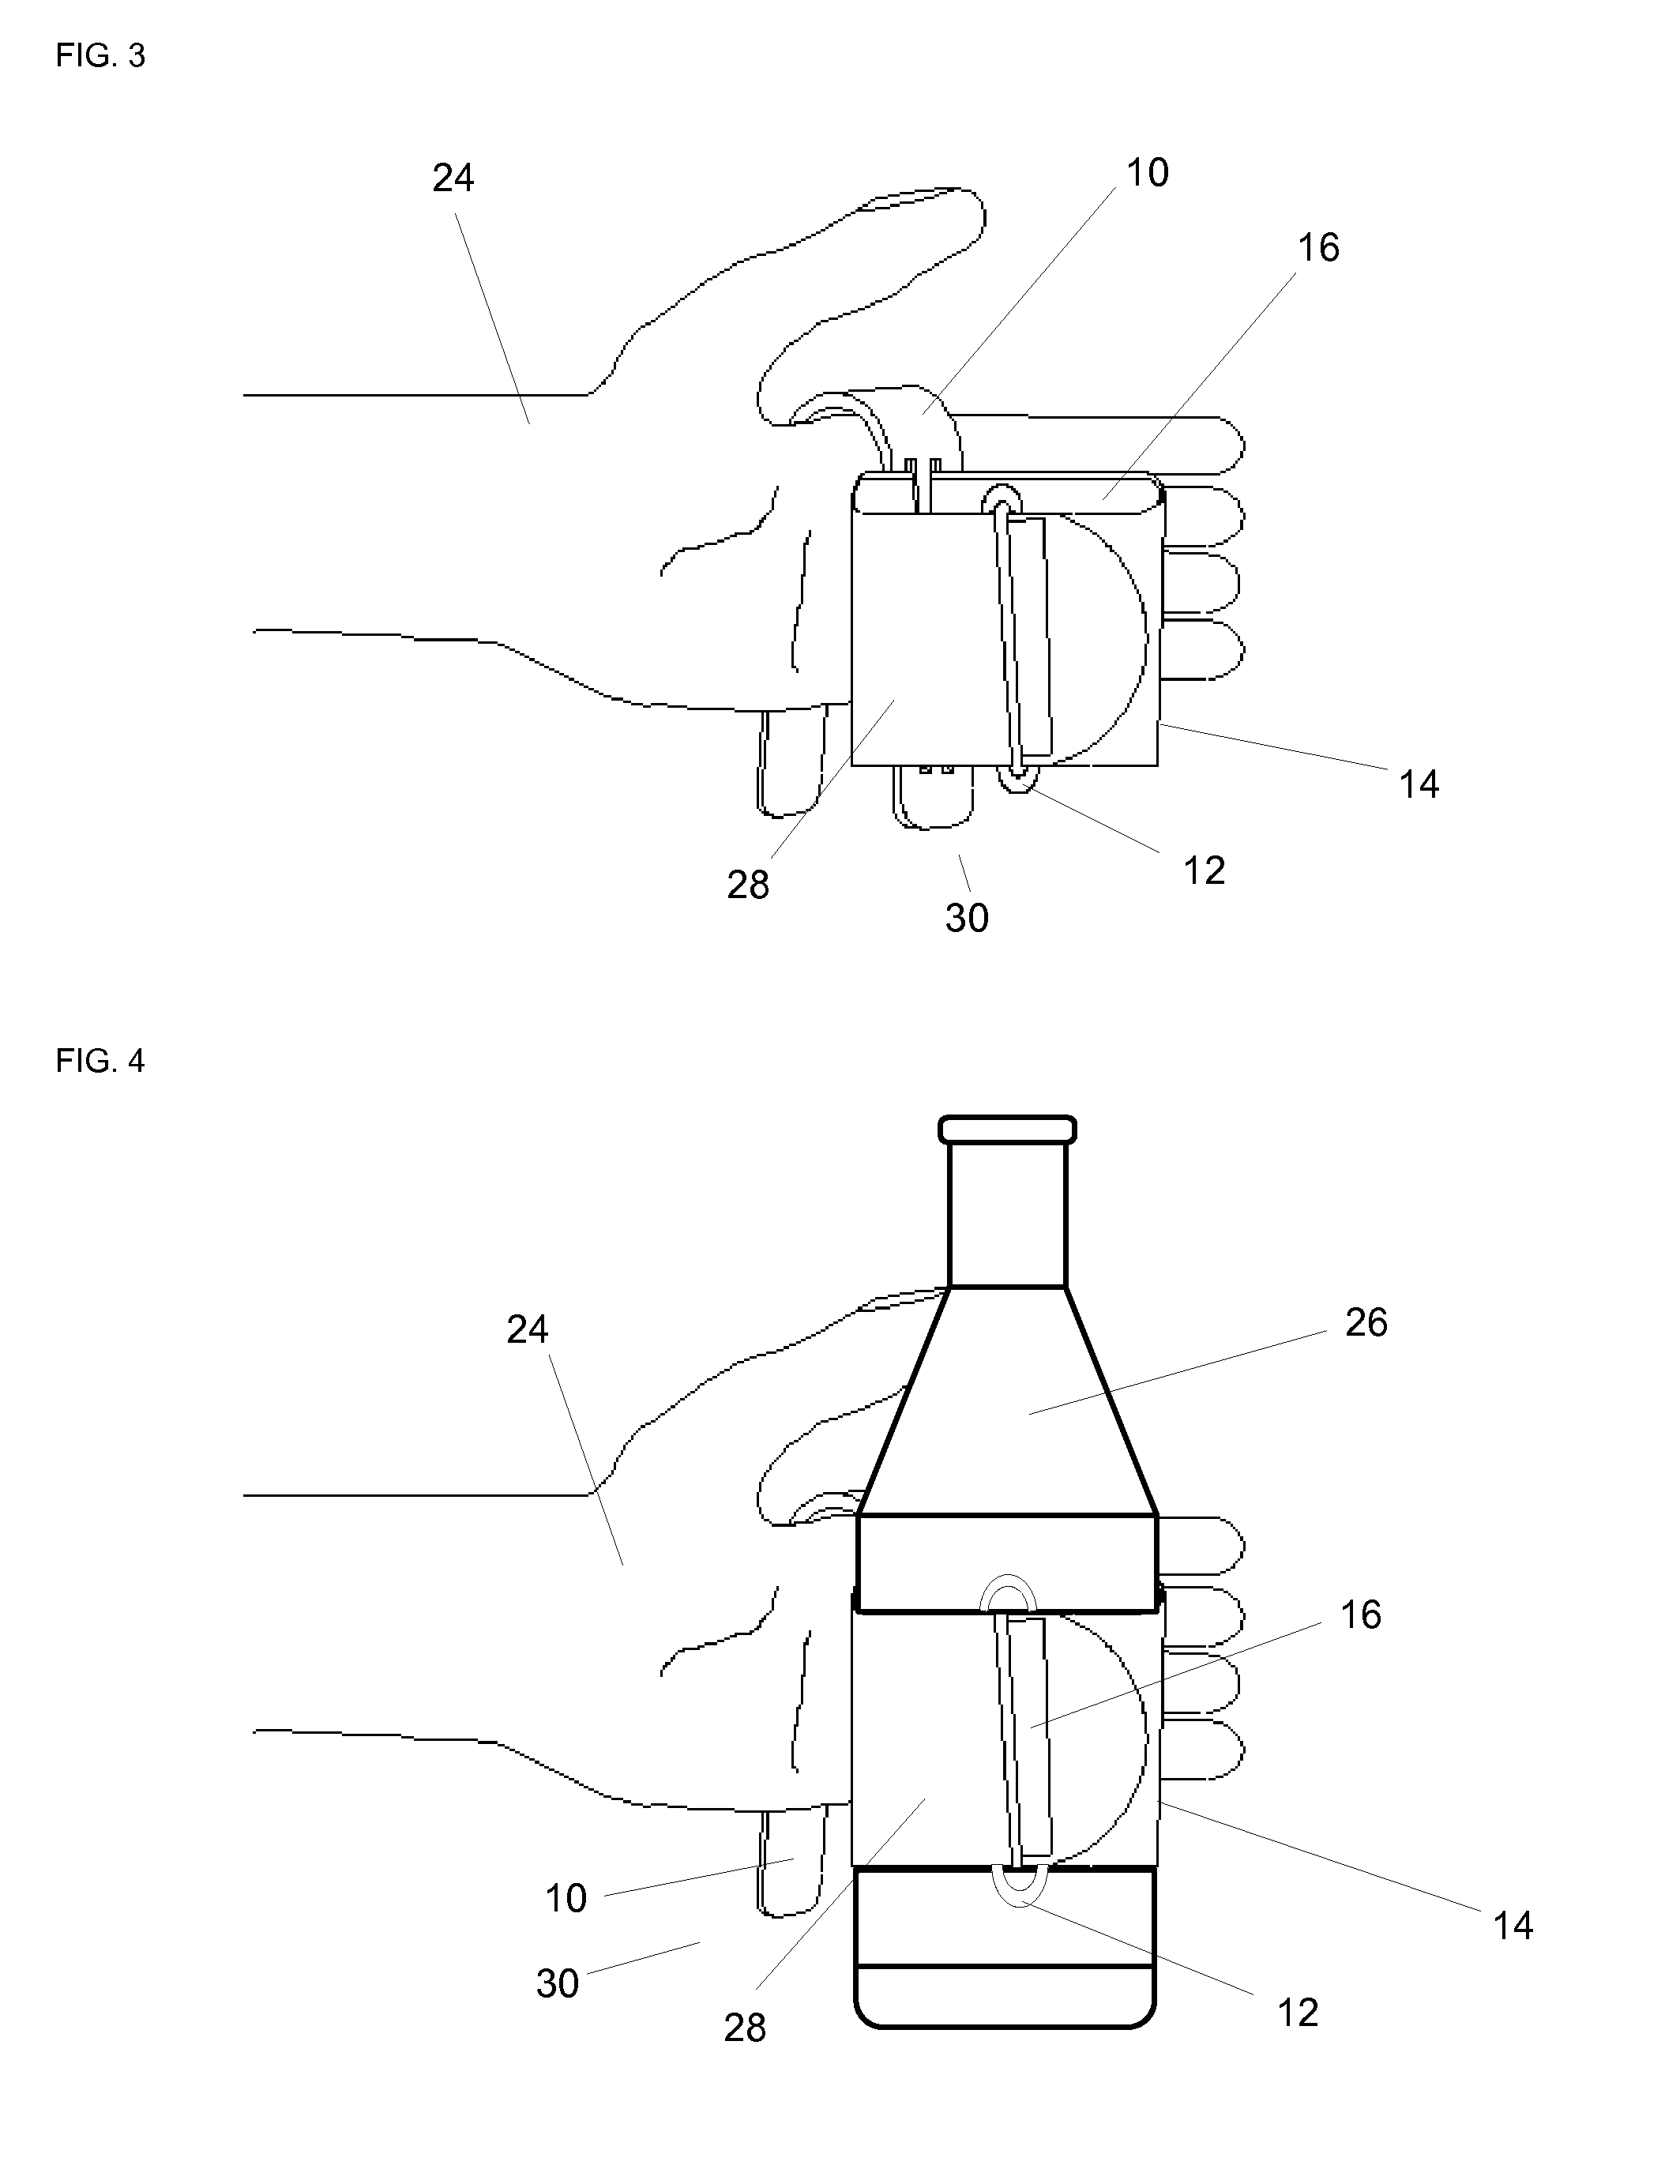 Apparatus for holding objects and methods of using and making the same